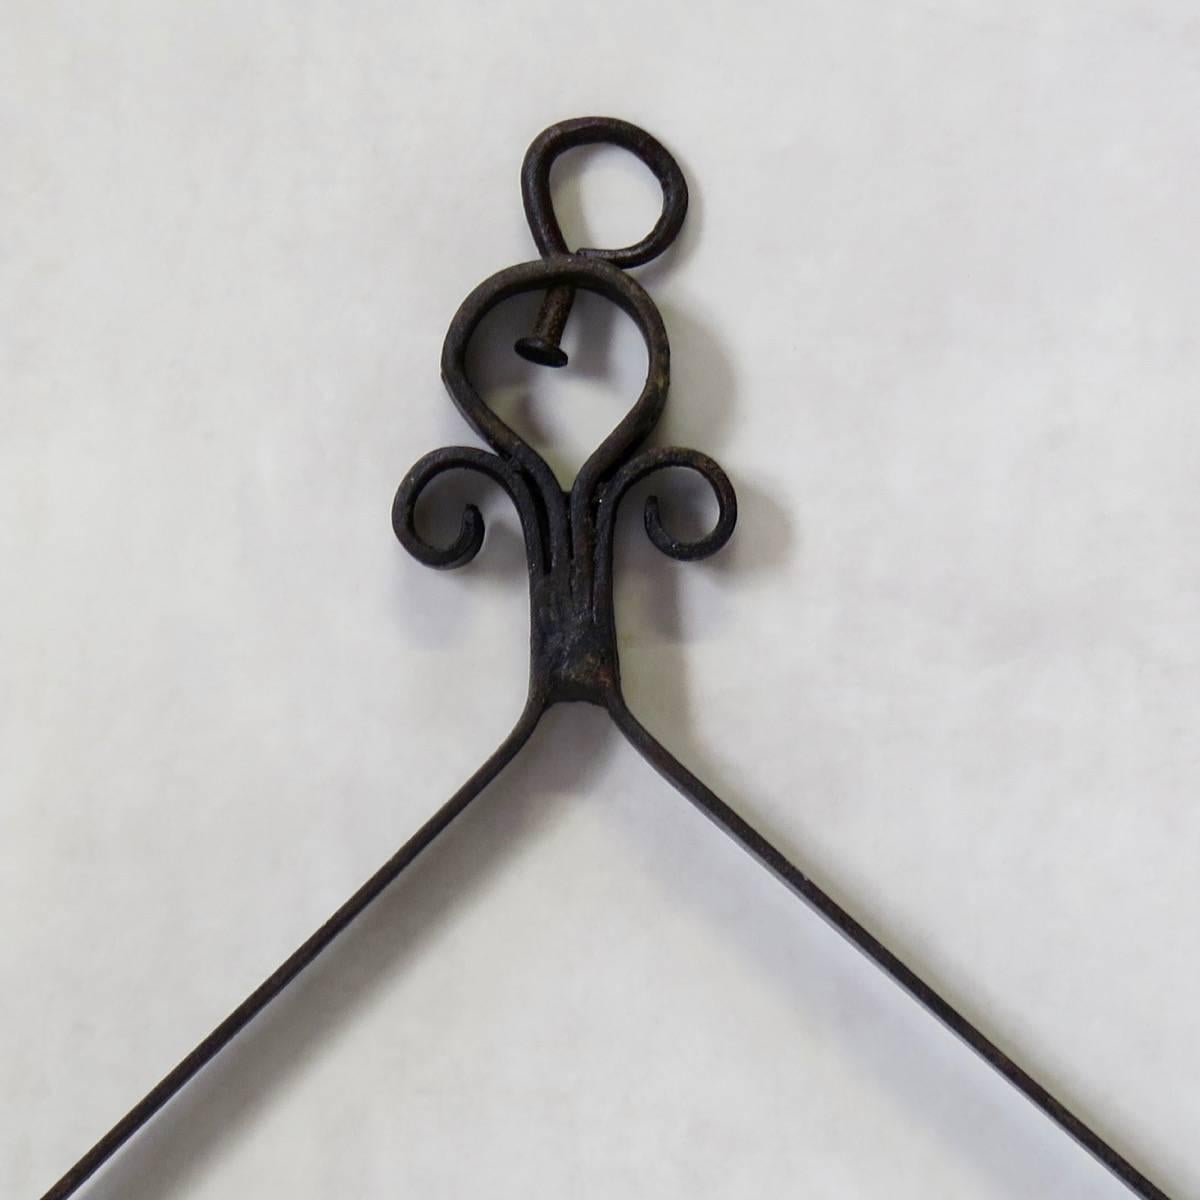 Unusual and decorative wrought-iron hanging candle holders. Ten available.